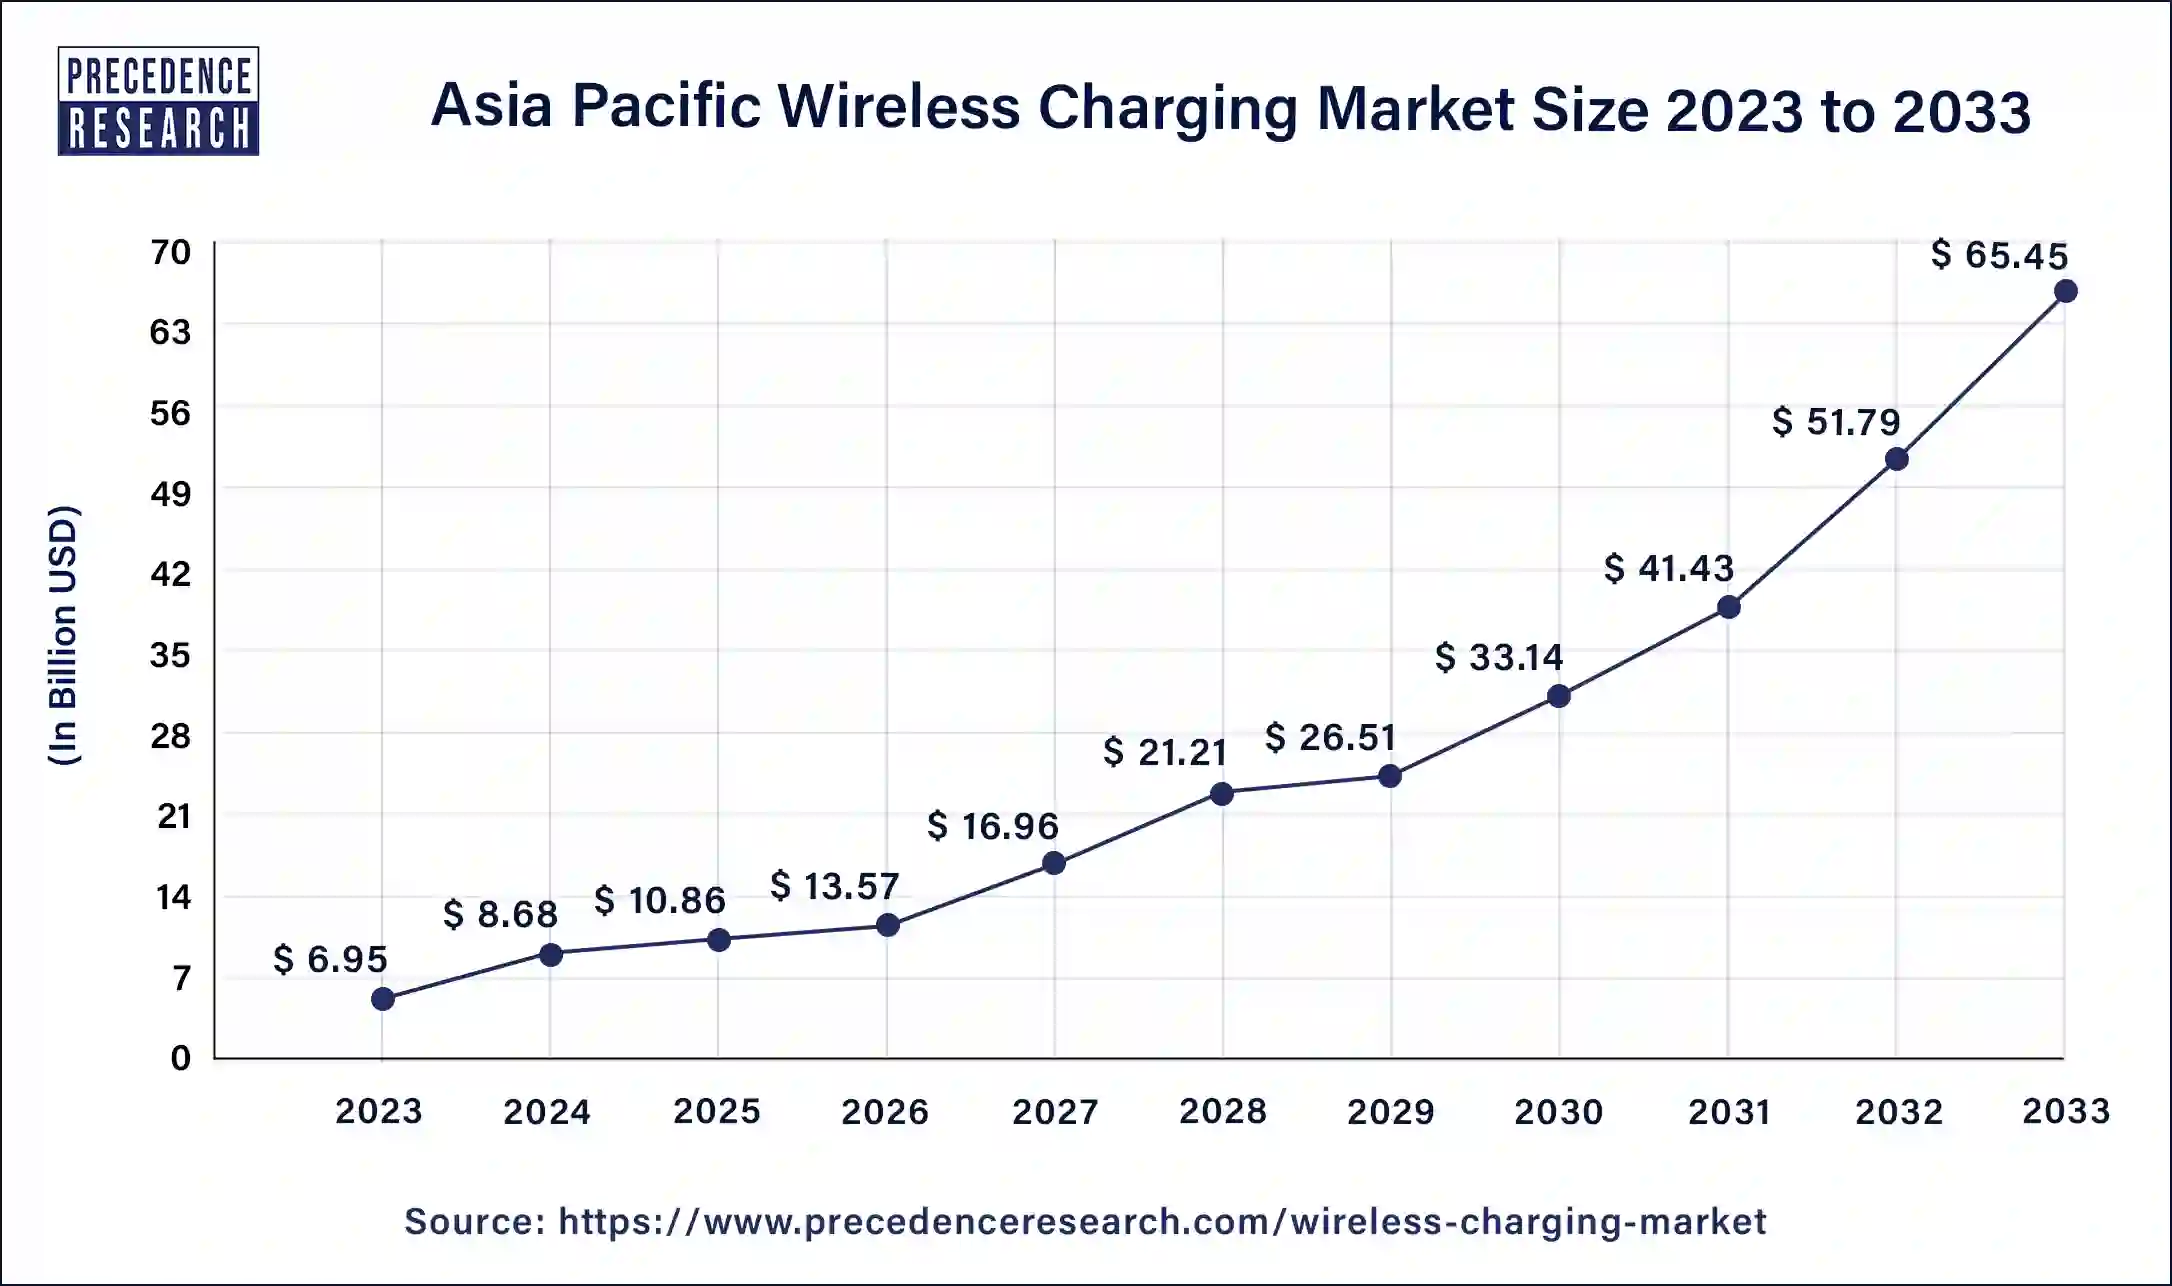 Asia Pacific Wireless Charging Market Size 2024 to 2033